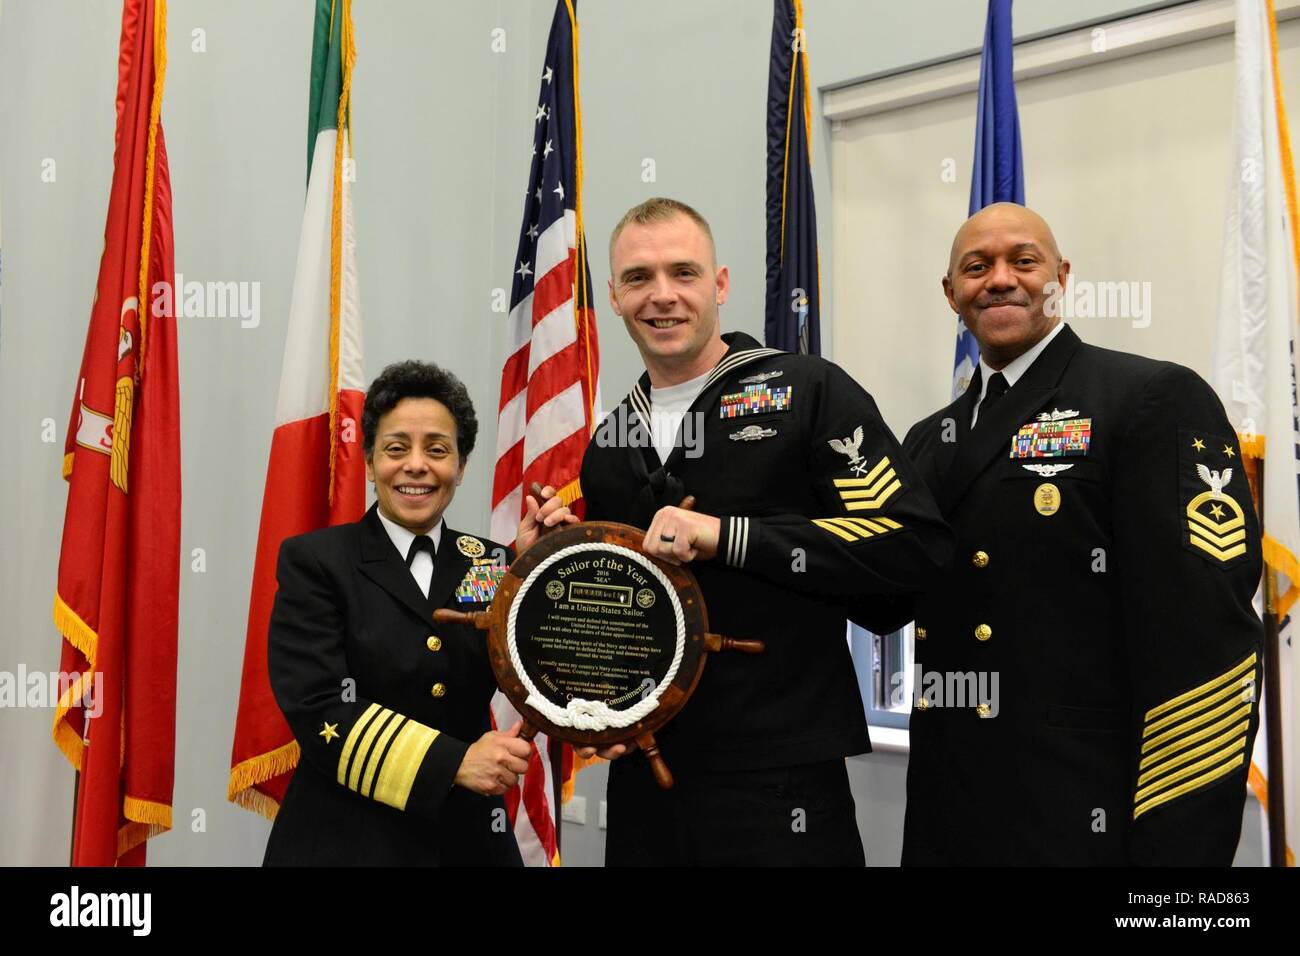 NAVAL SUPPORT ACTIVITY NAPLES, Italy (Jan. 27, 2017) From left to right: Commander, U.S. Naval Forces Europe-Africa, Adm. Michelle Howard; U.S. Naval Forces Europe-Africa Sea Sailor of the Year, Intelligence Specialist 1st Class Kevin Pulley; and U.S. Naval Forces Europe-Africa Fleet Master Chief Raymond D. Kemp Sr. pose for a photo as Howard presents Pulley with a plaque at the Commander, U.S. Naval Forces Europe-Africa Sailor of the Year ceremony Jan. 27, 2017.  U.S. Naval Forces Europe-Africa, headquartered in Naples, Italy, oversees joint and naval operations, often in concert with allied, Stock Photo